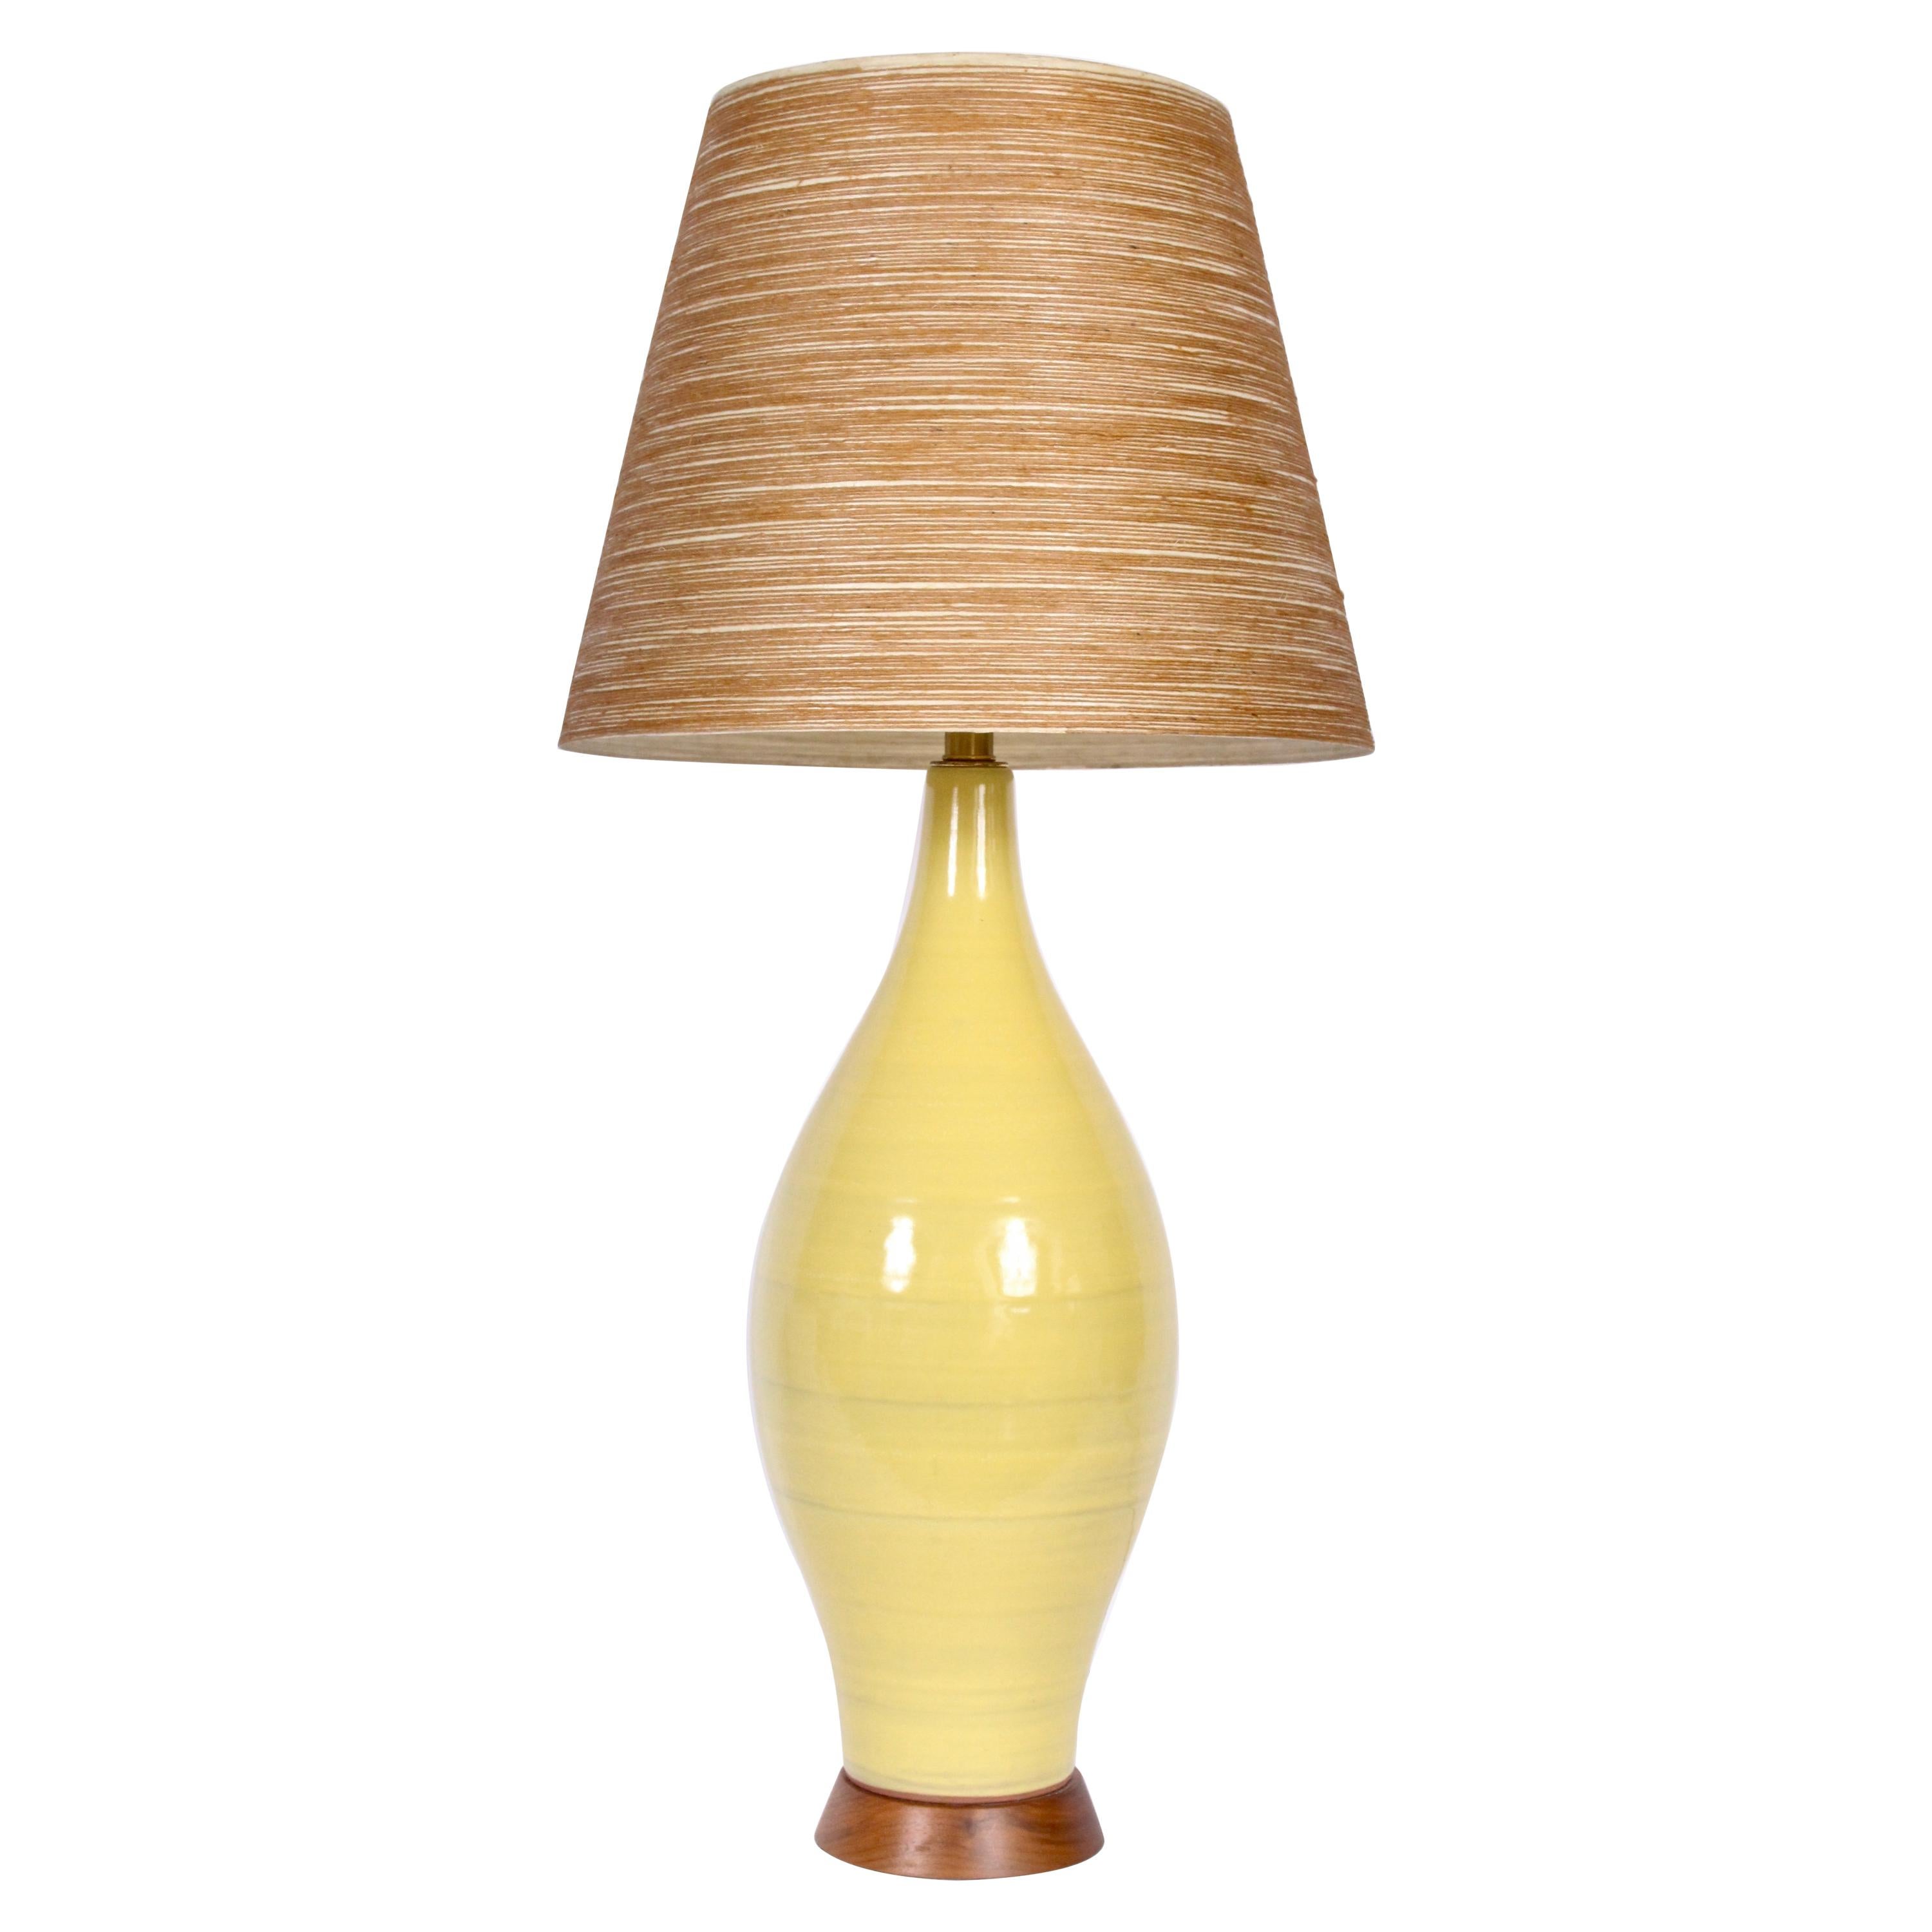 Monumental Design-Technics Bright Yellow Banded Art Pottery Table Lamp For Sale 1